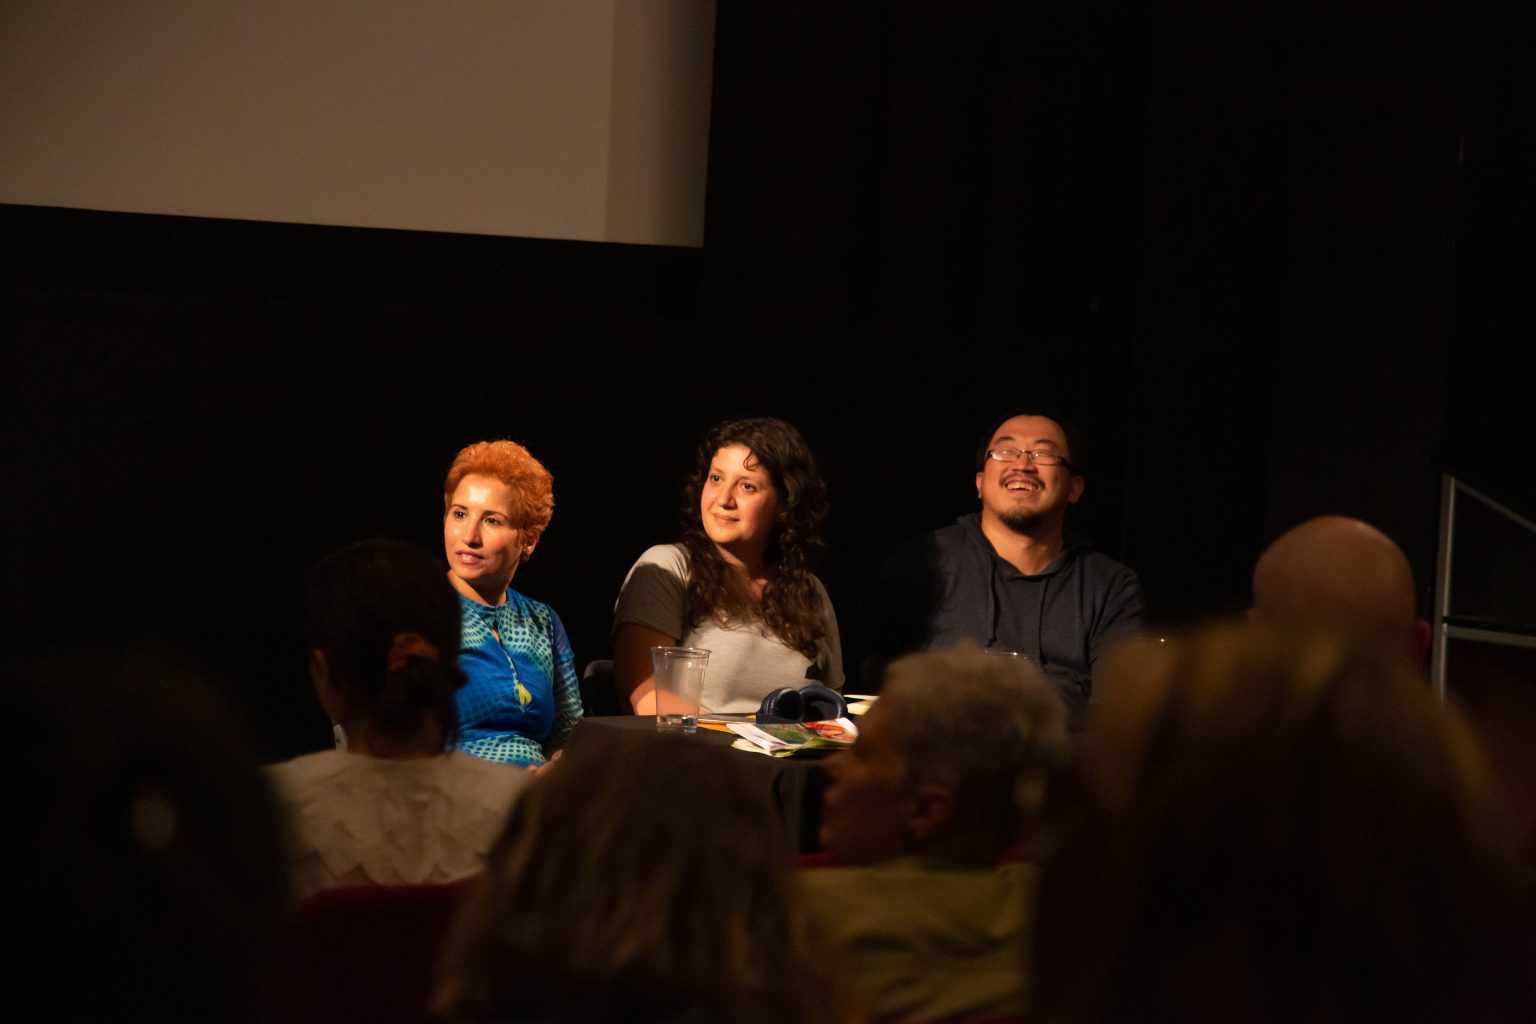 Three artists sat close together in front of an audience taking part in a panel discussion. They are all smiling and glancing to their right.